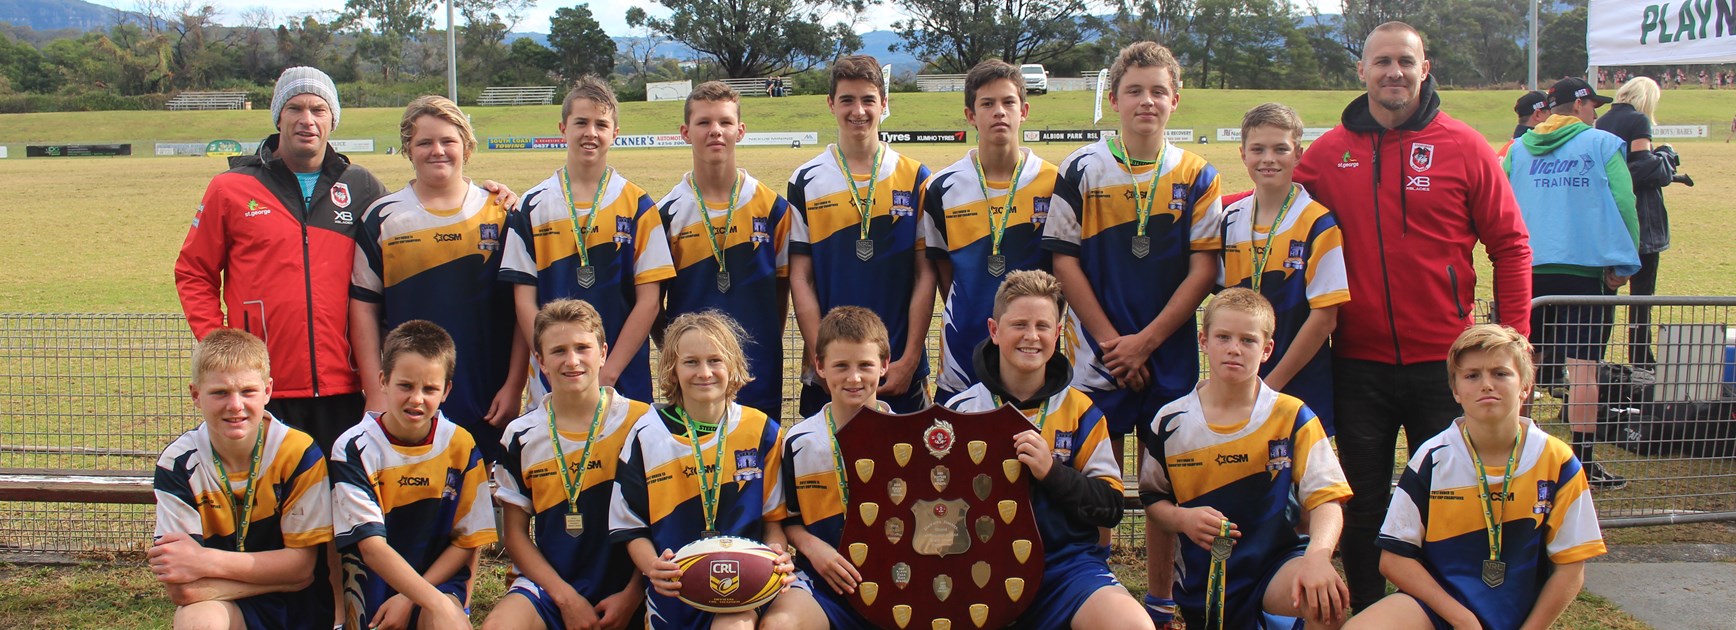 Southern NSW secondary school championships